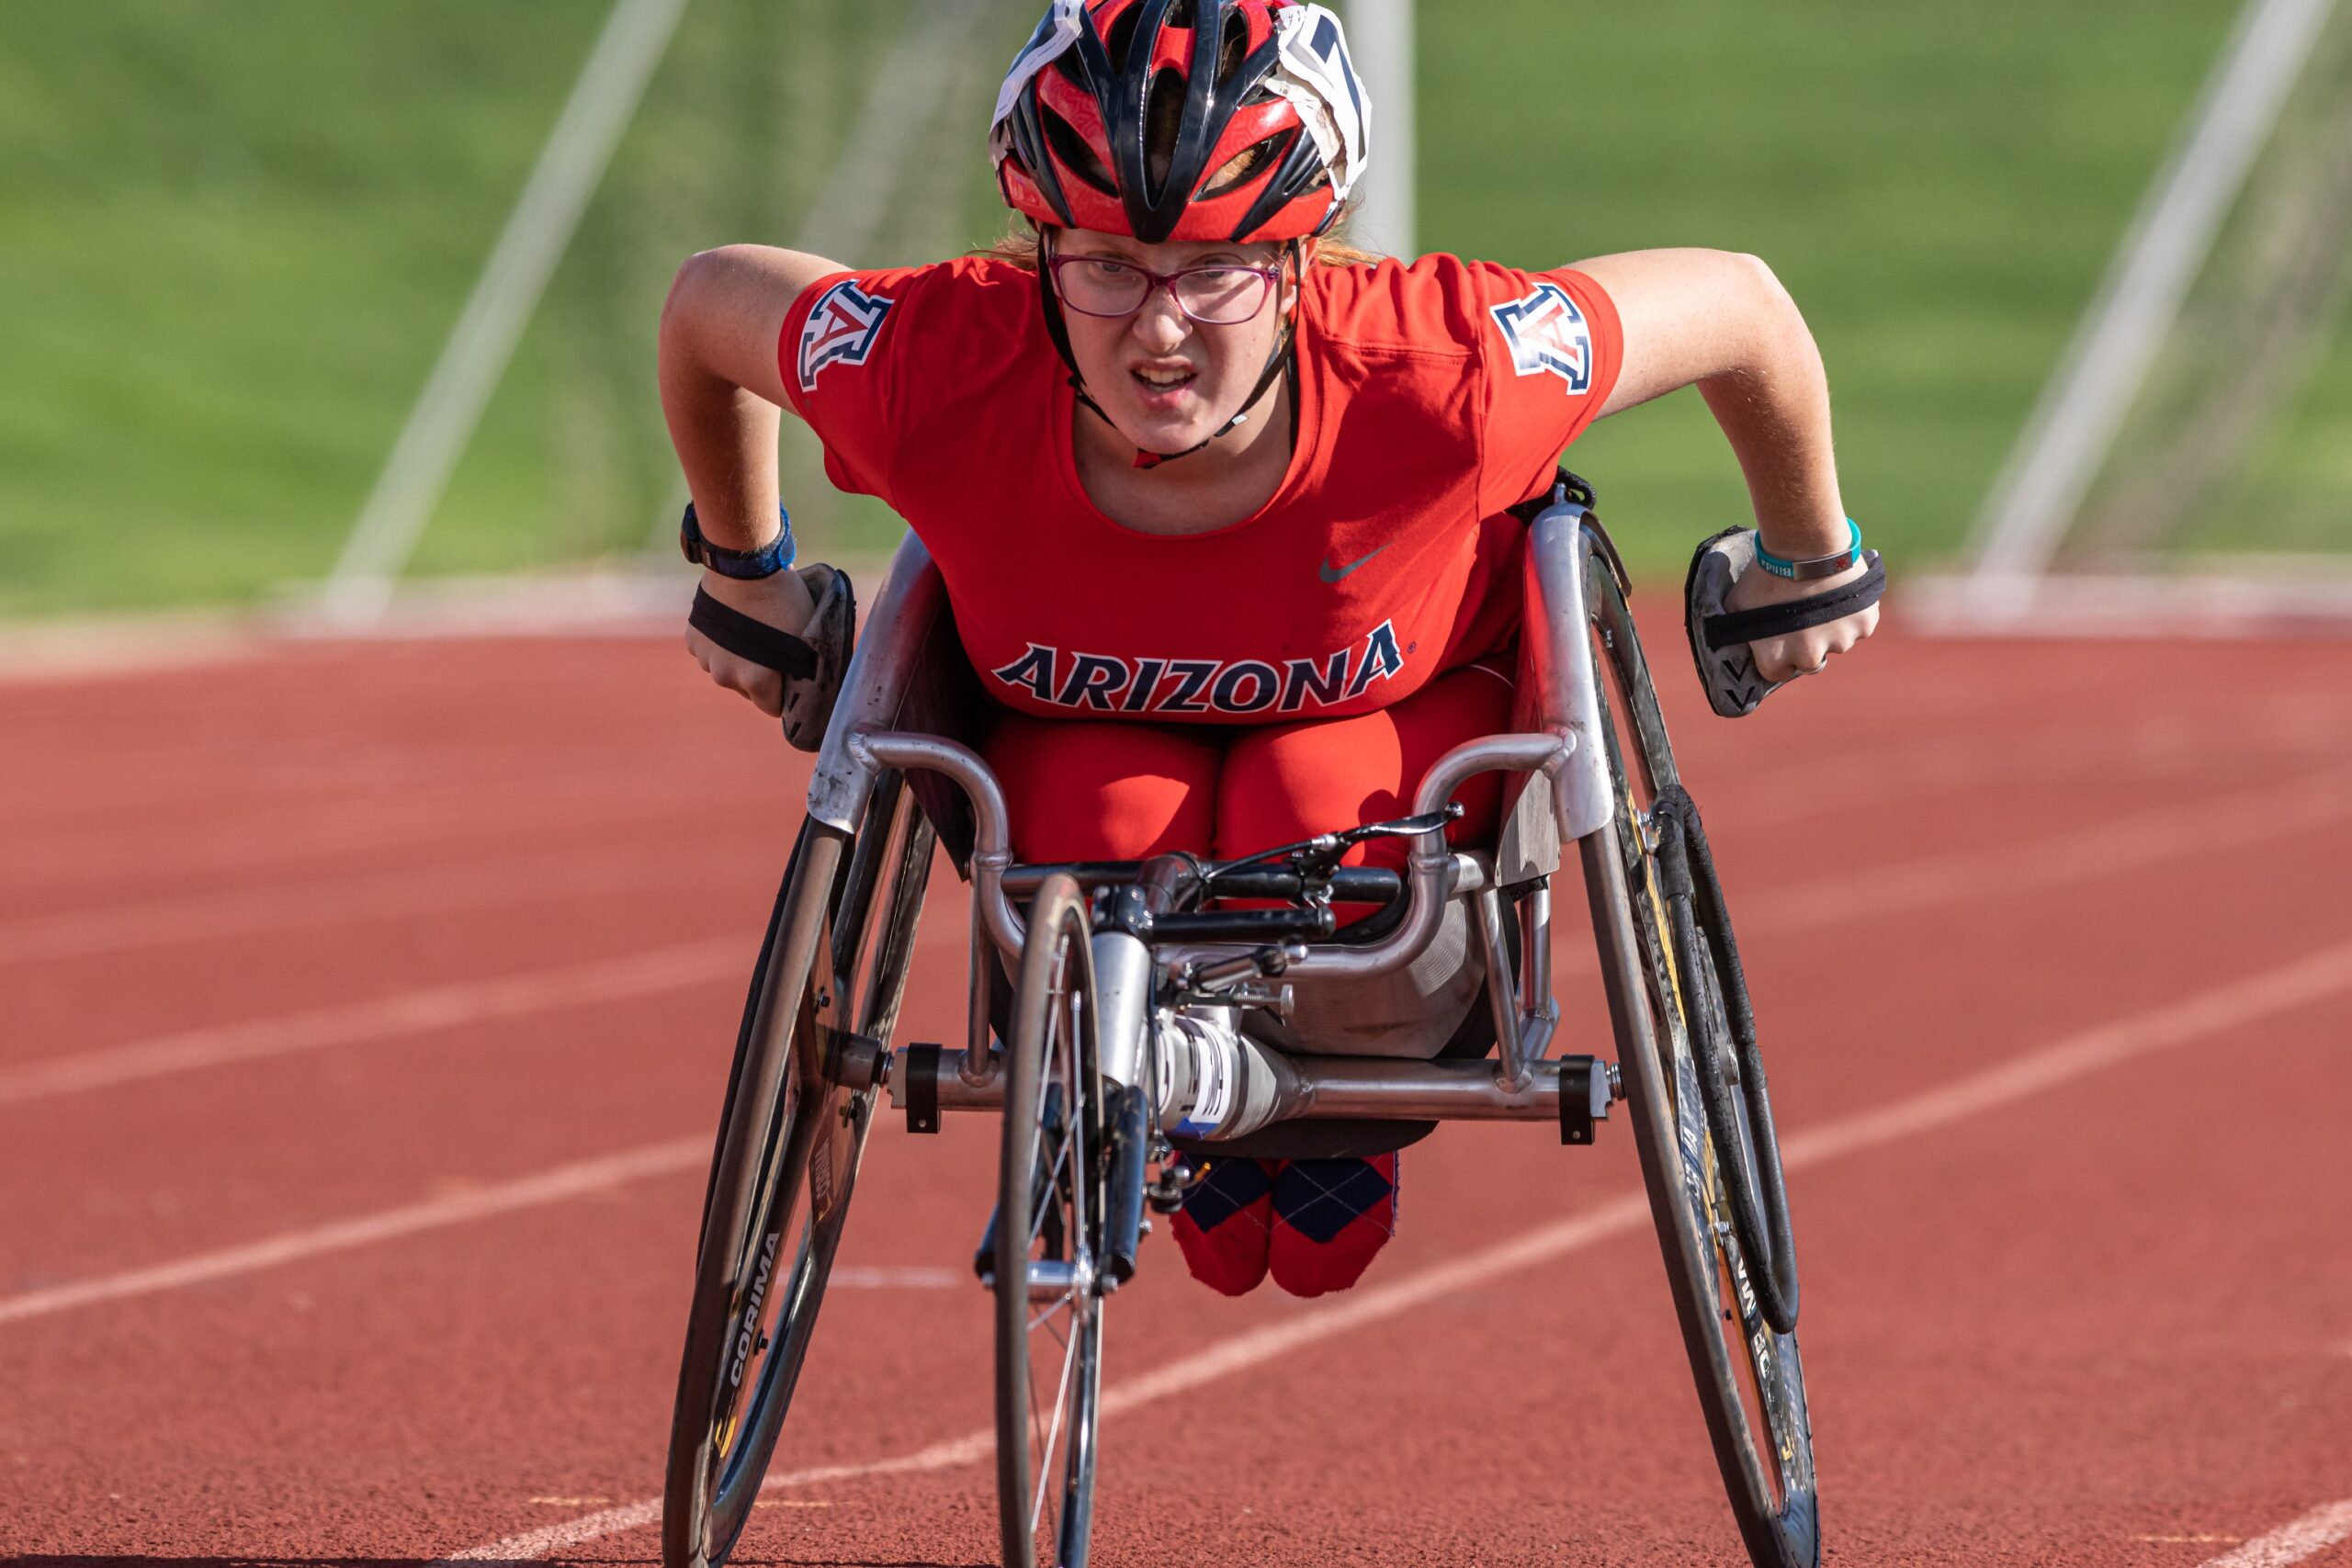 Athlete on a track in a racing wheelchair. Athlete is wearing all red University of Arizona uniform on